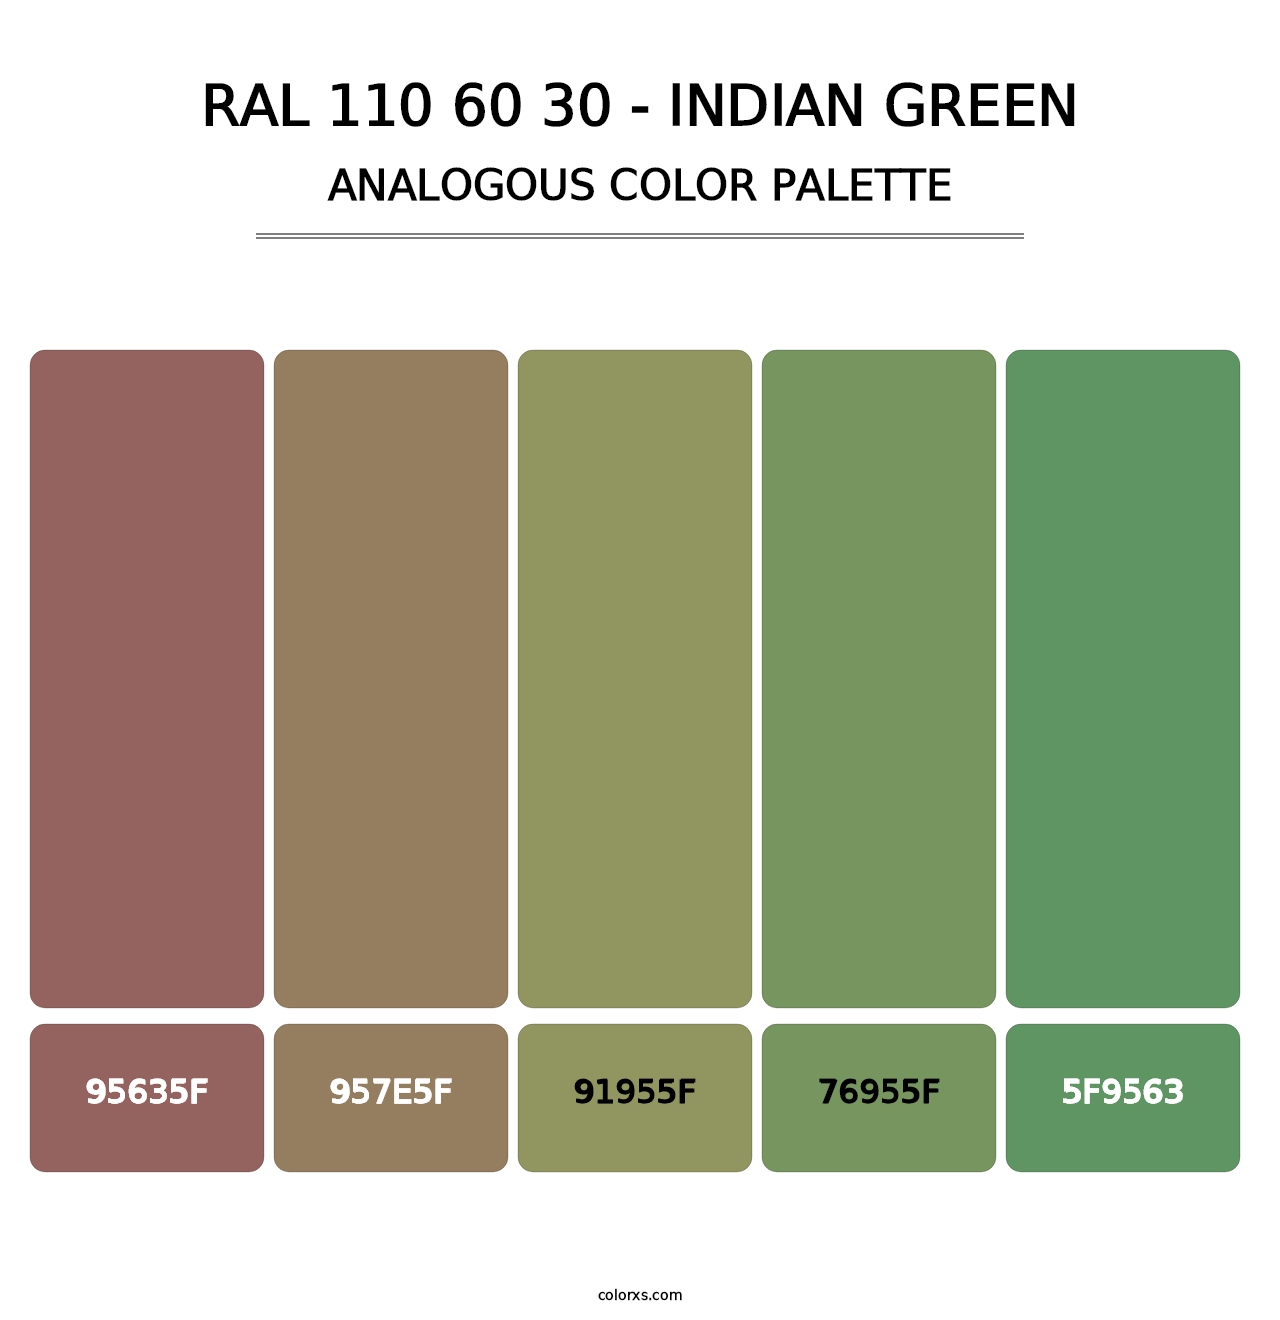 RAL 110 60 30 - Indian Green - Analogous Color Palette